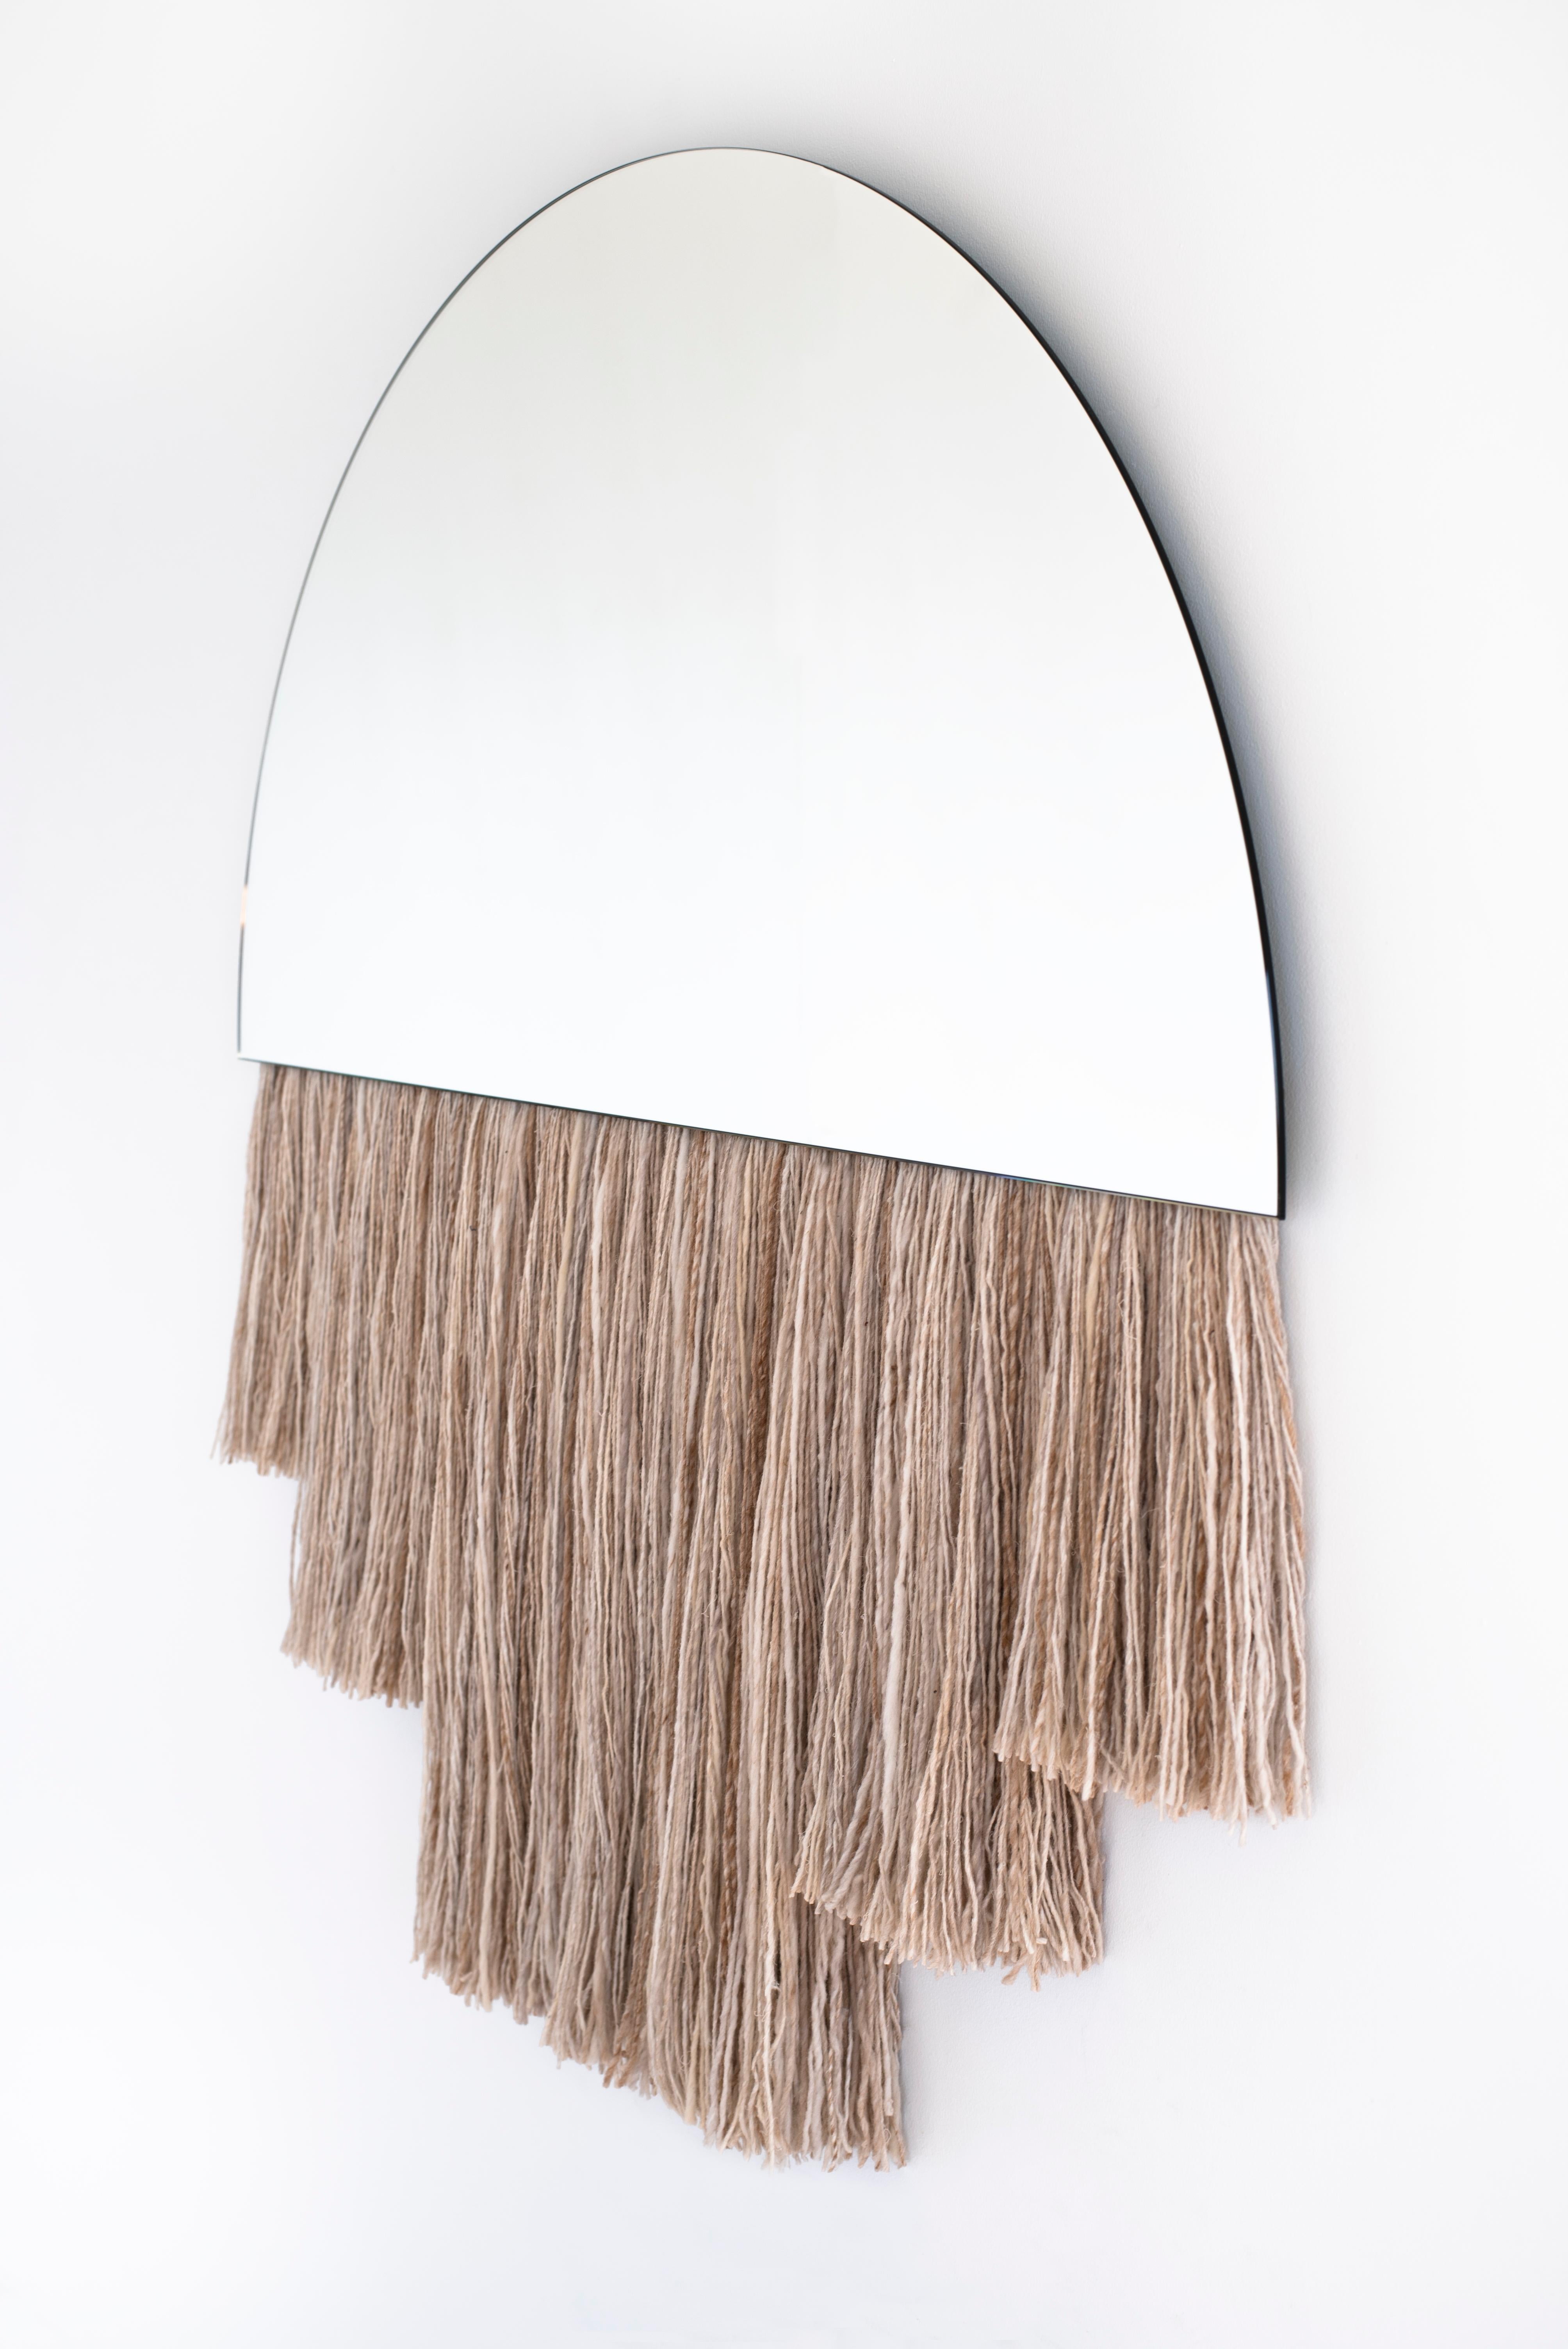 Large Clear Mirror with Fiber, Contemporary Half Moon Mirror by Ben & Aja Blanc In New Condition For Sale In Rumford, RI